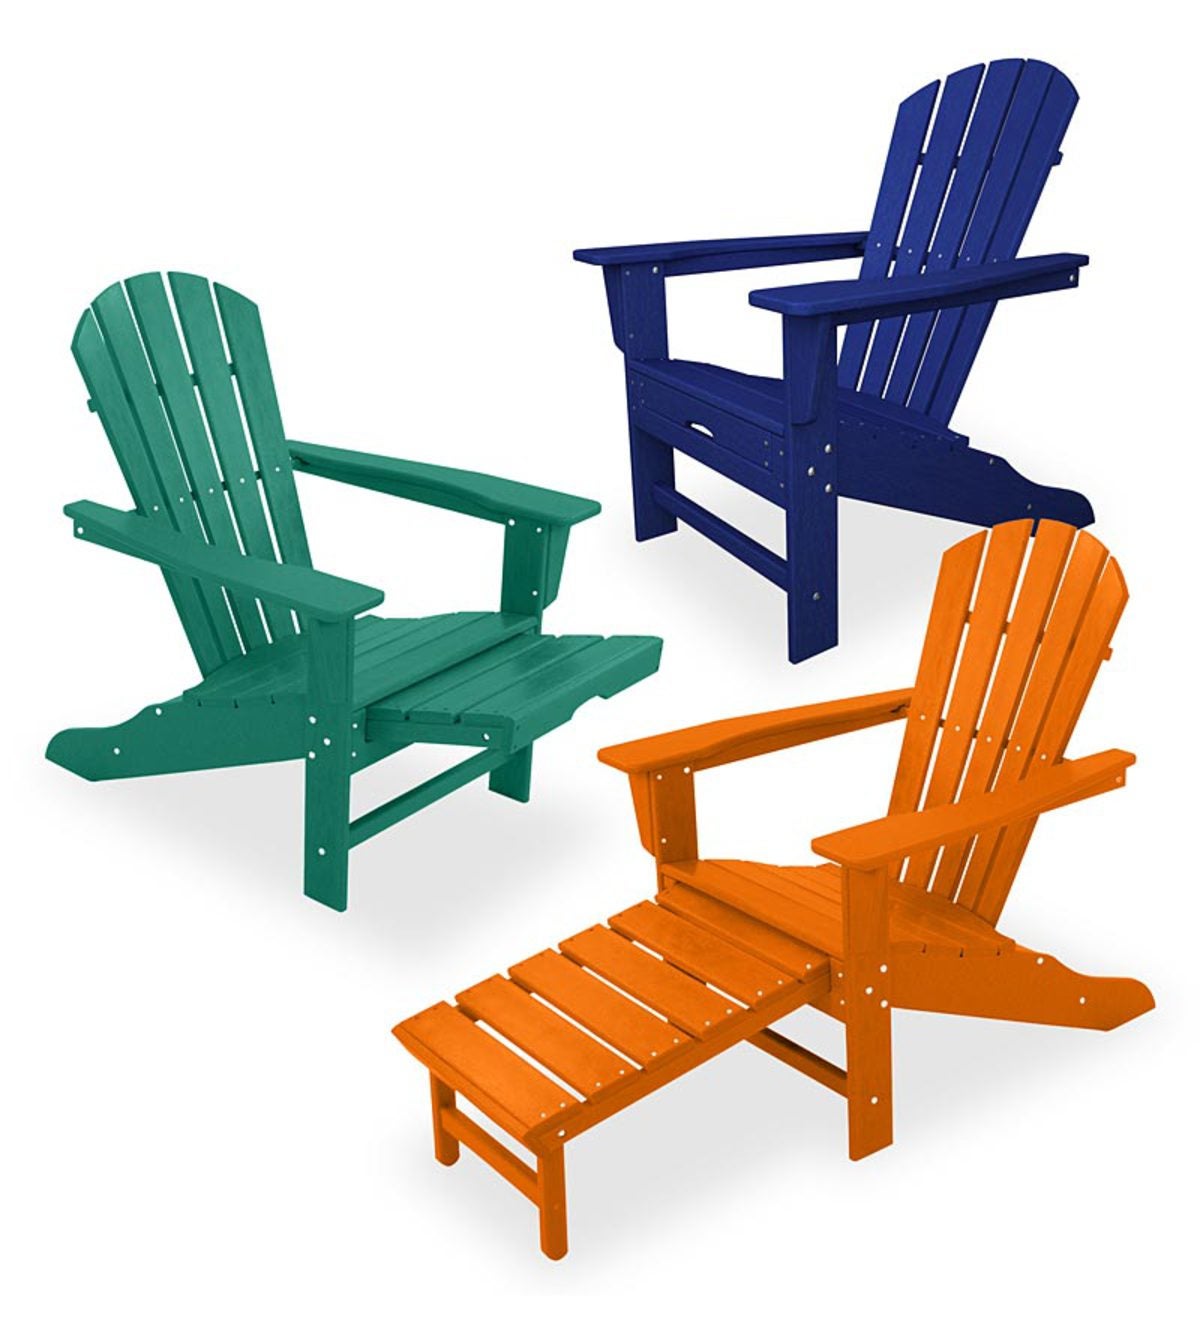  Polywood South Beach Adirondack Chair for Large Space